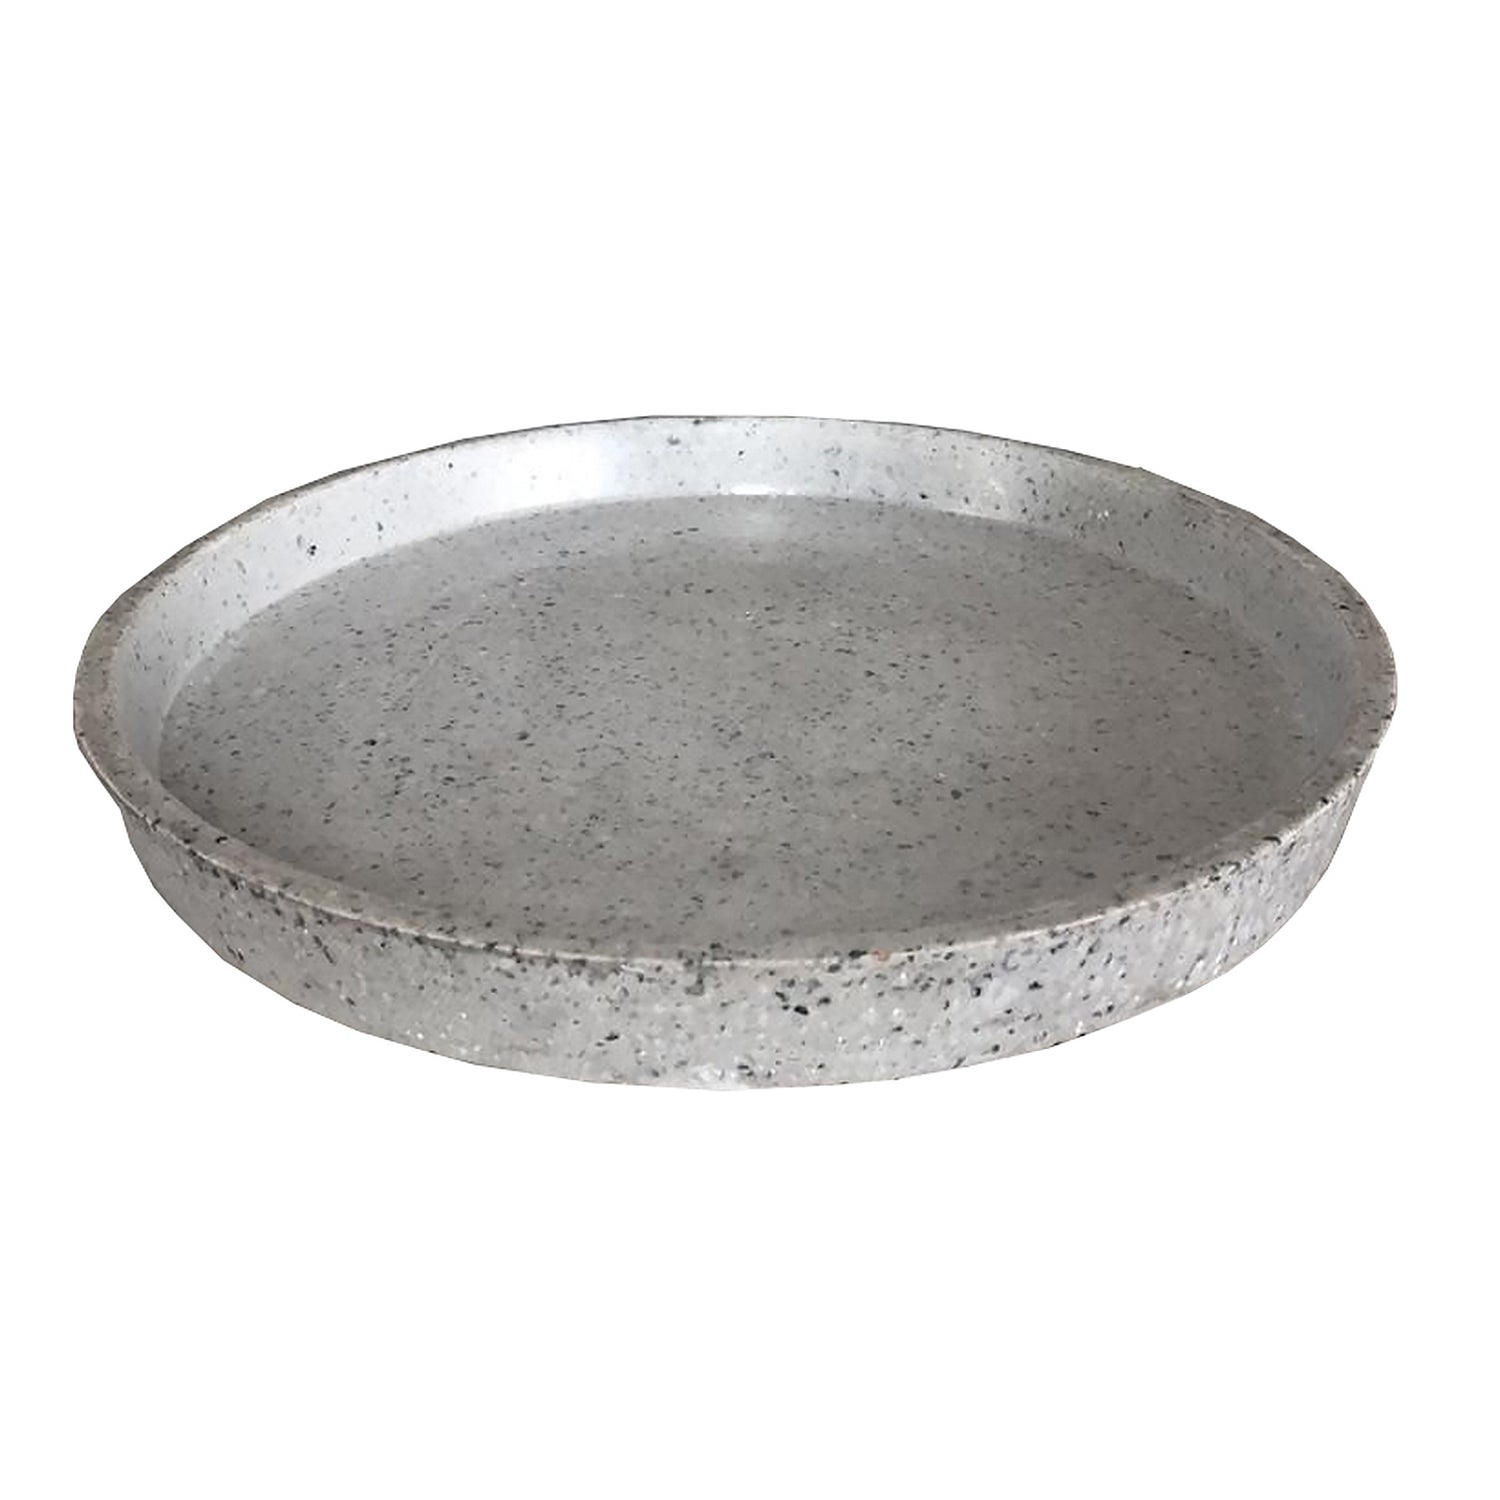 Polished Cement Round Saucer